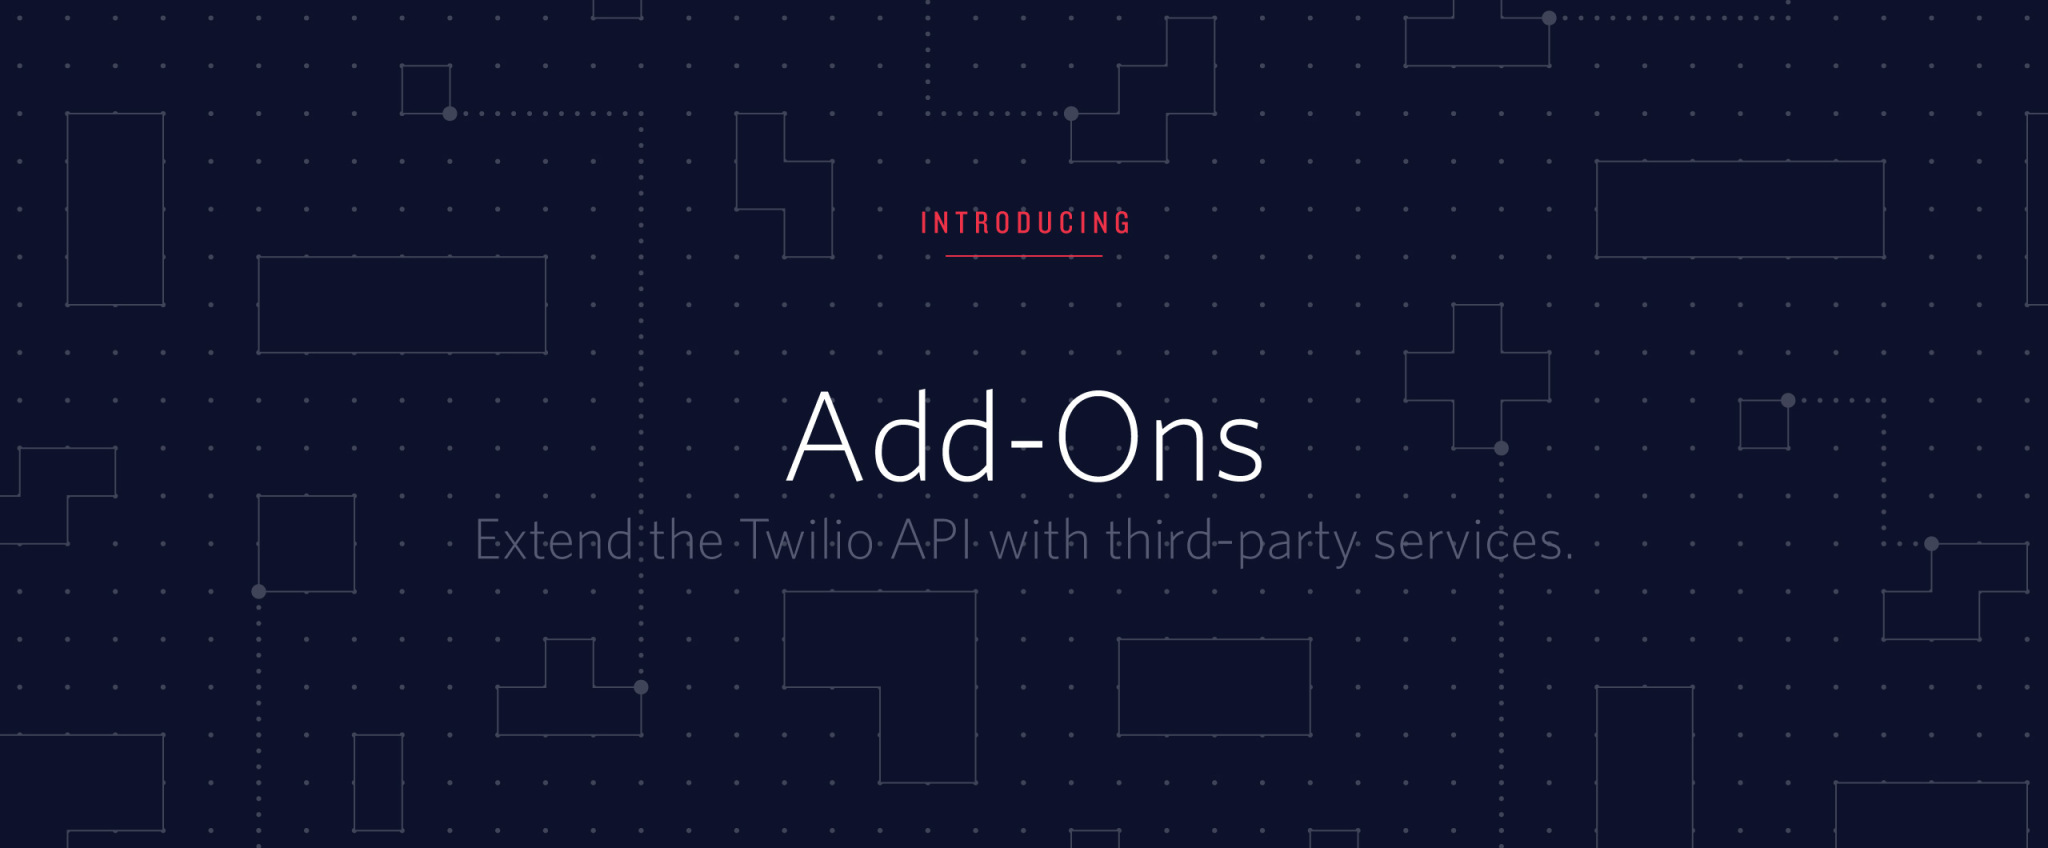 Introducing Add-ons